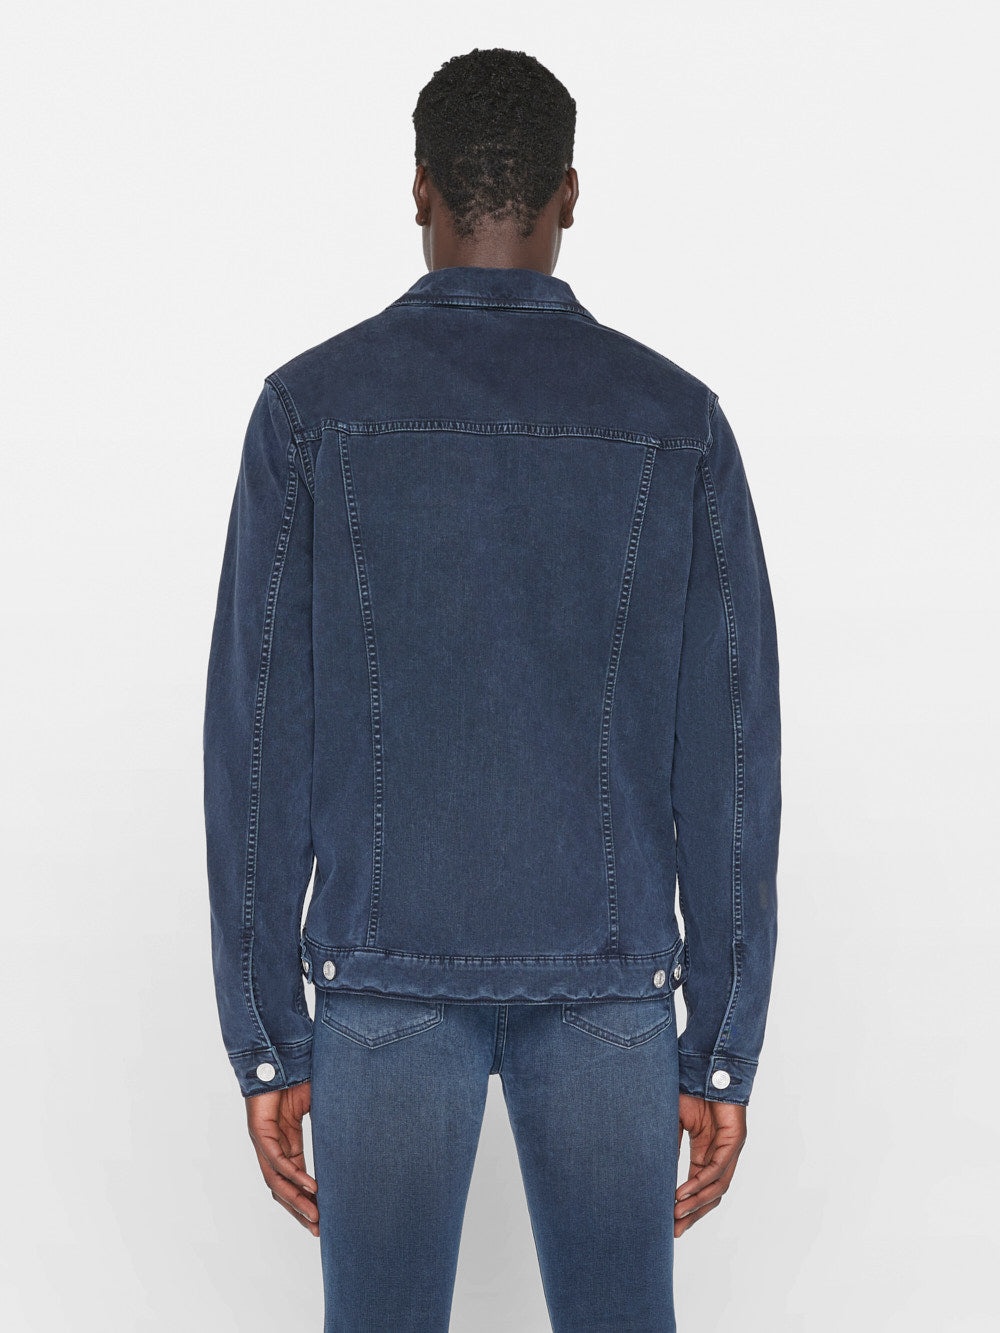 Twill Heritage Jacket in Washed Navy - 8